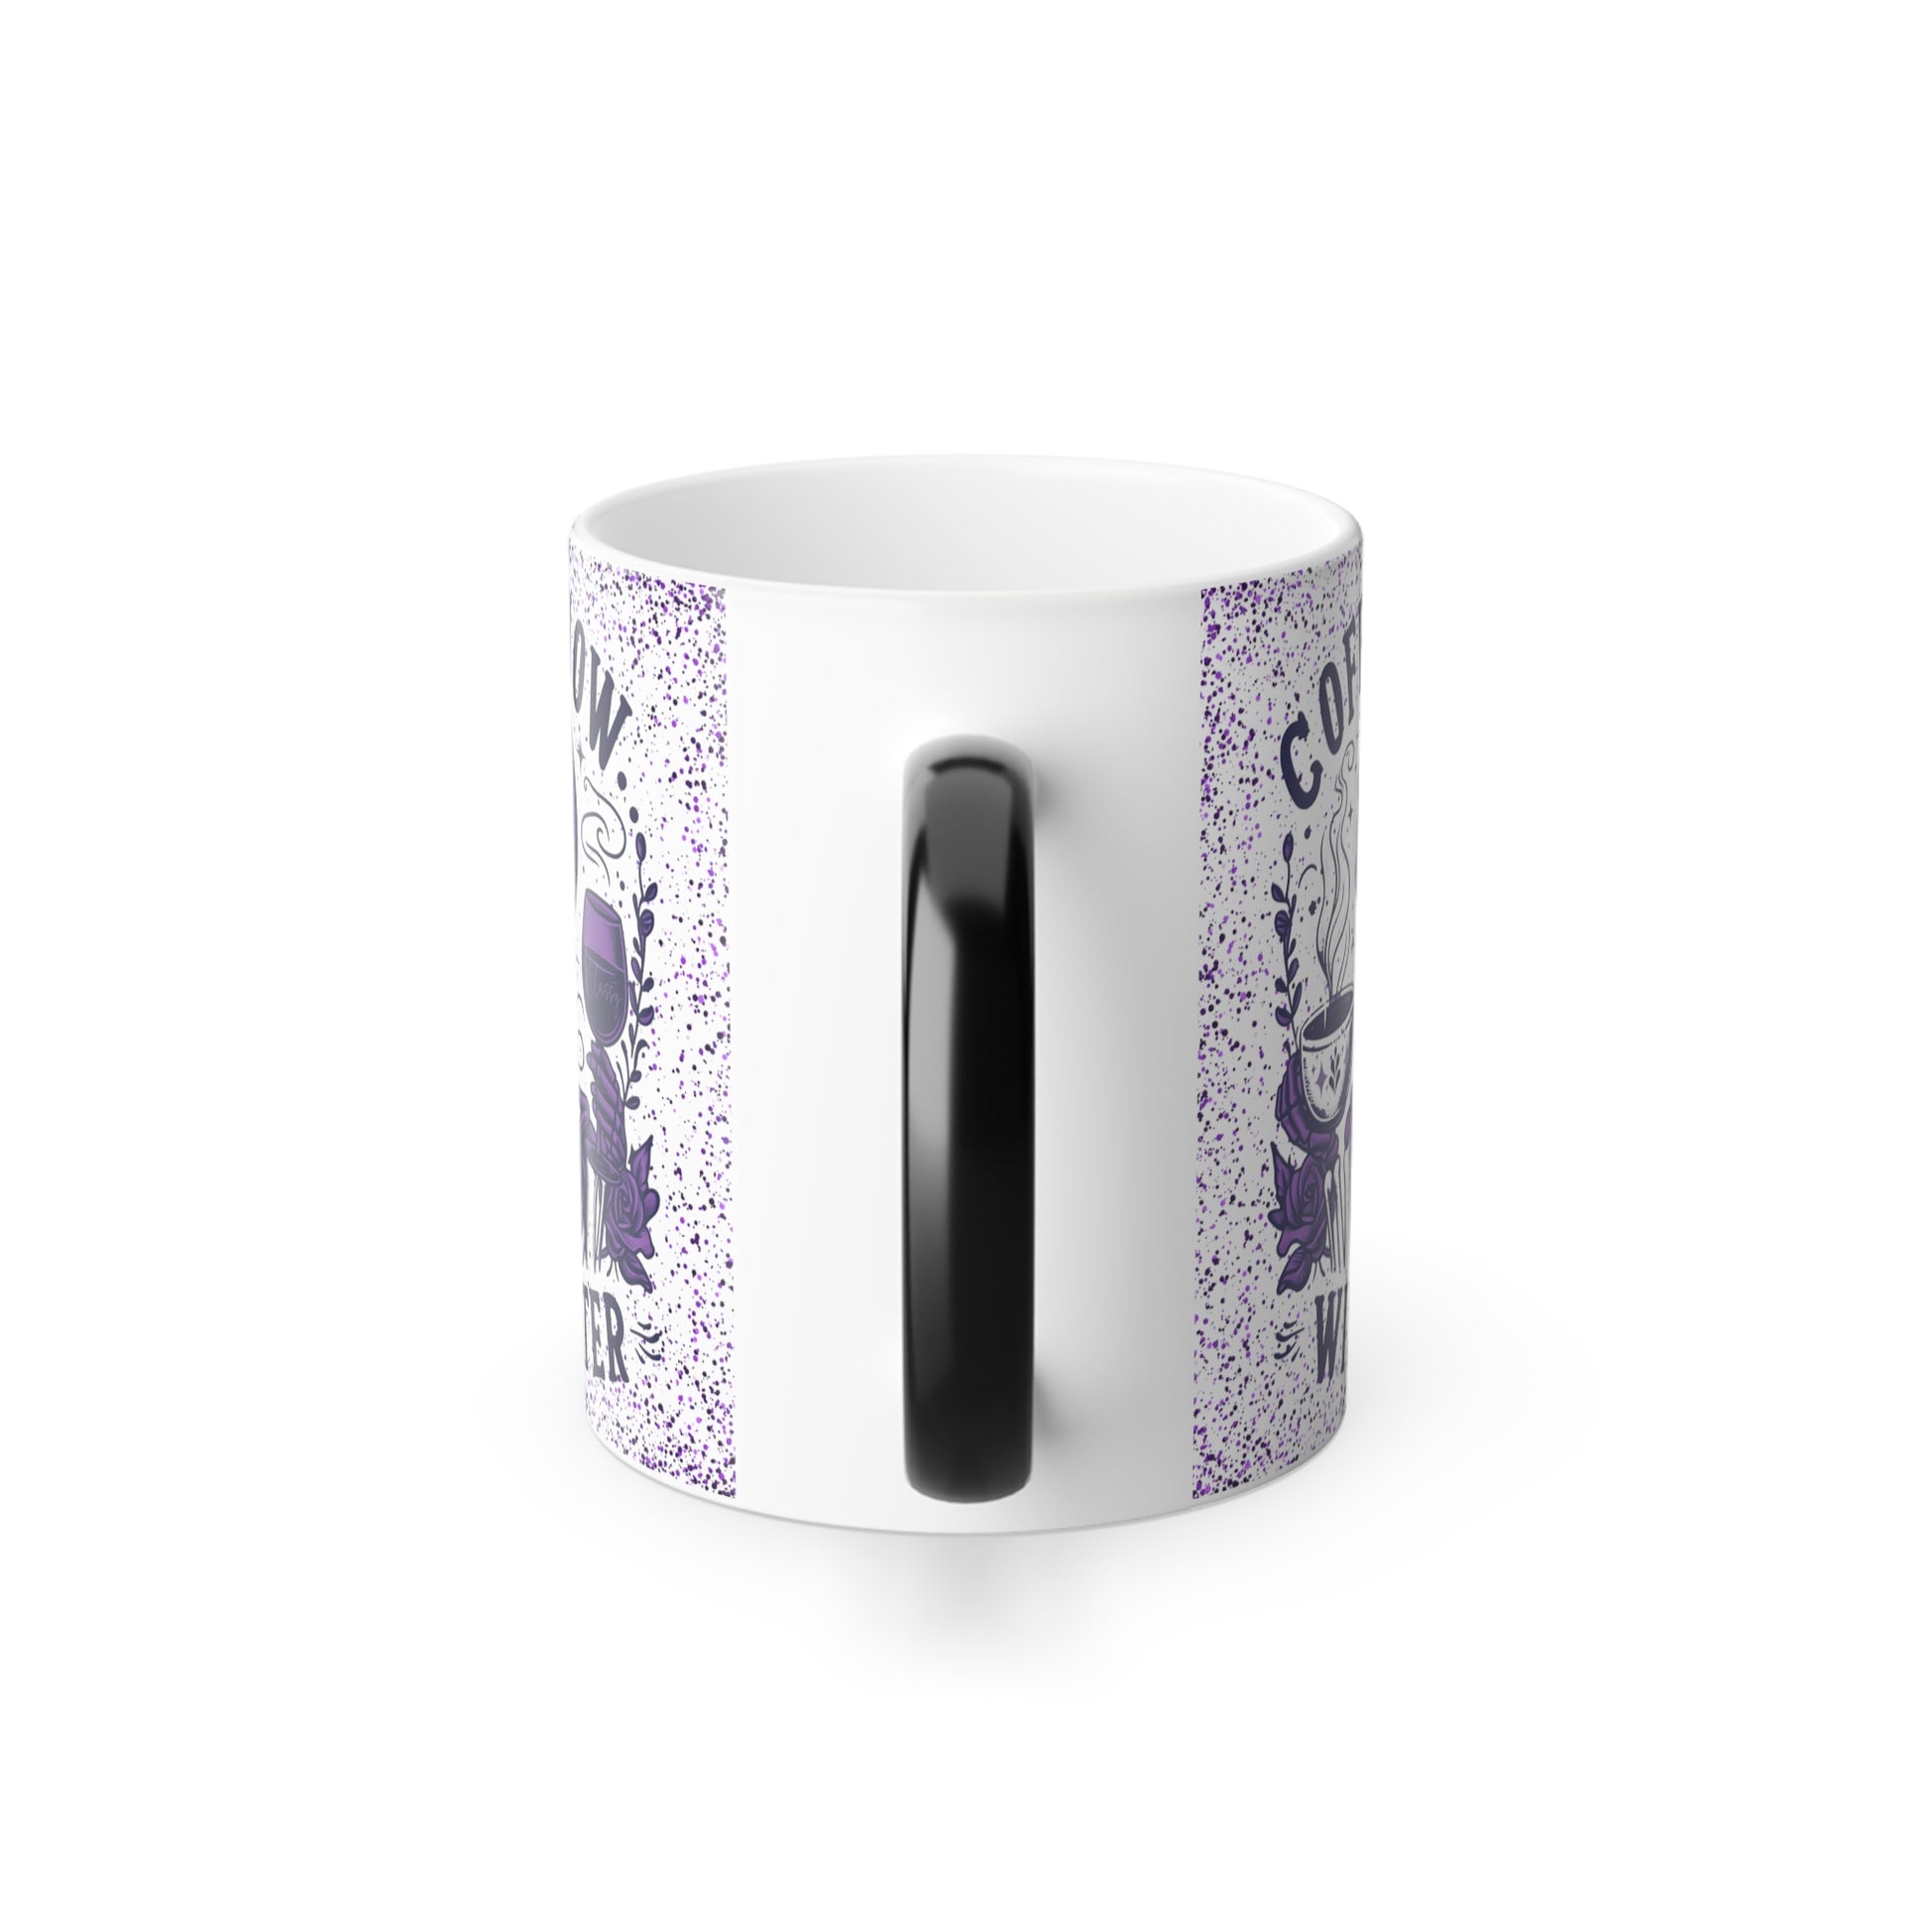 Color morphing mug with purple skeleton for gift, side view.